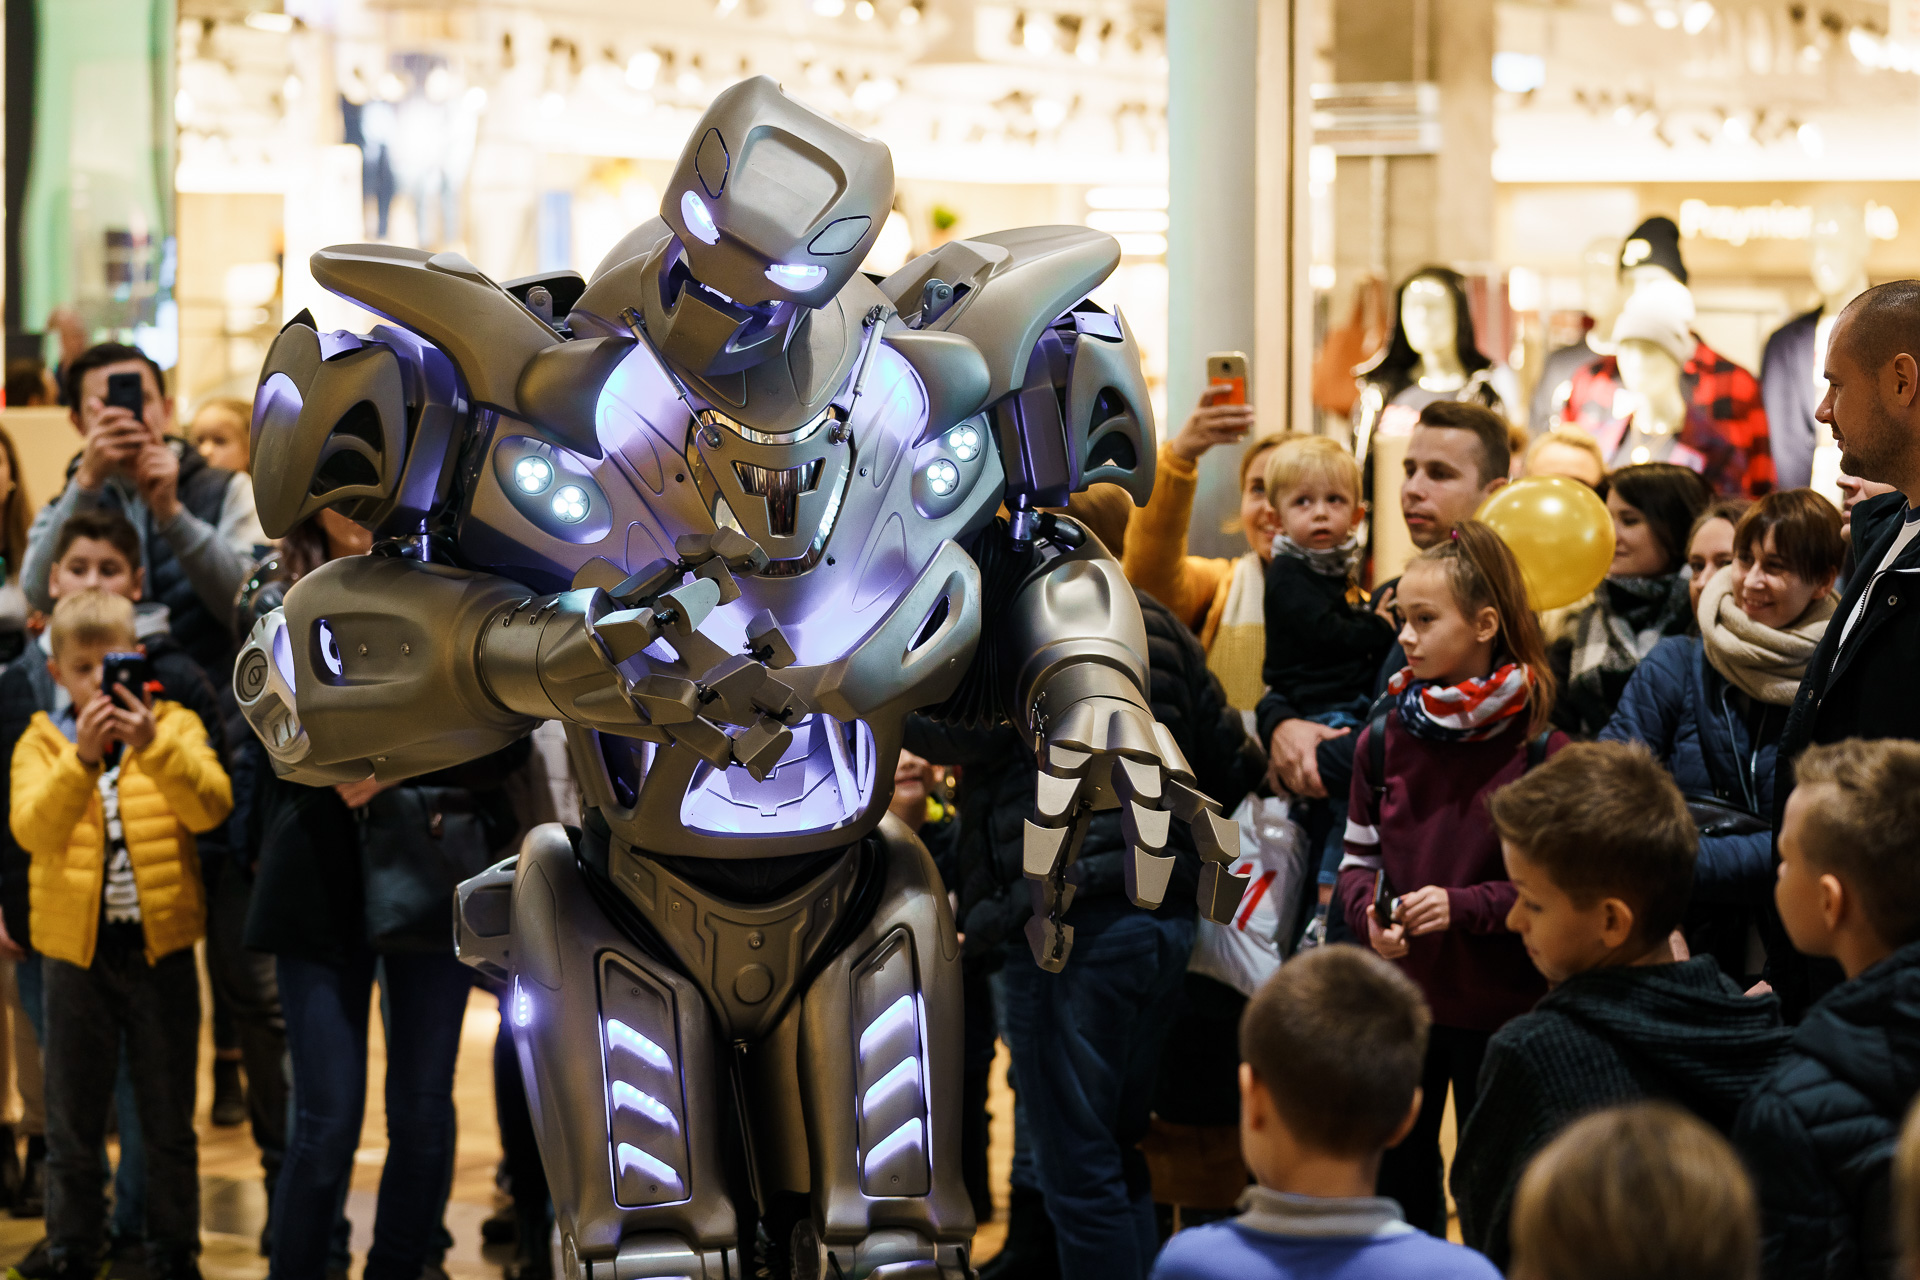 Titan the Robot attracting a crowd at a shopping mall in Warsaw, Poland.